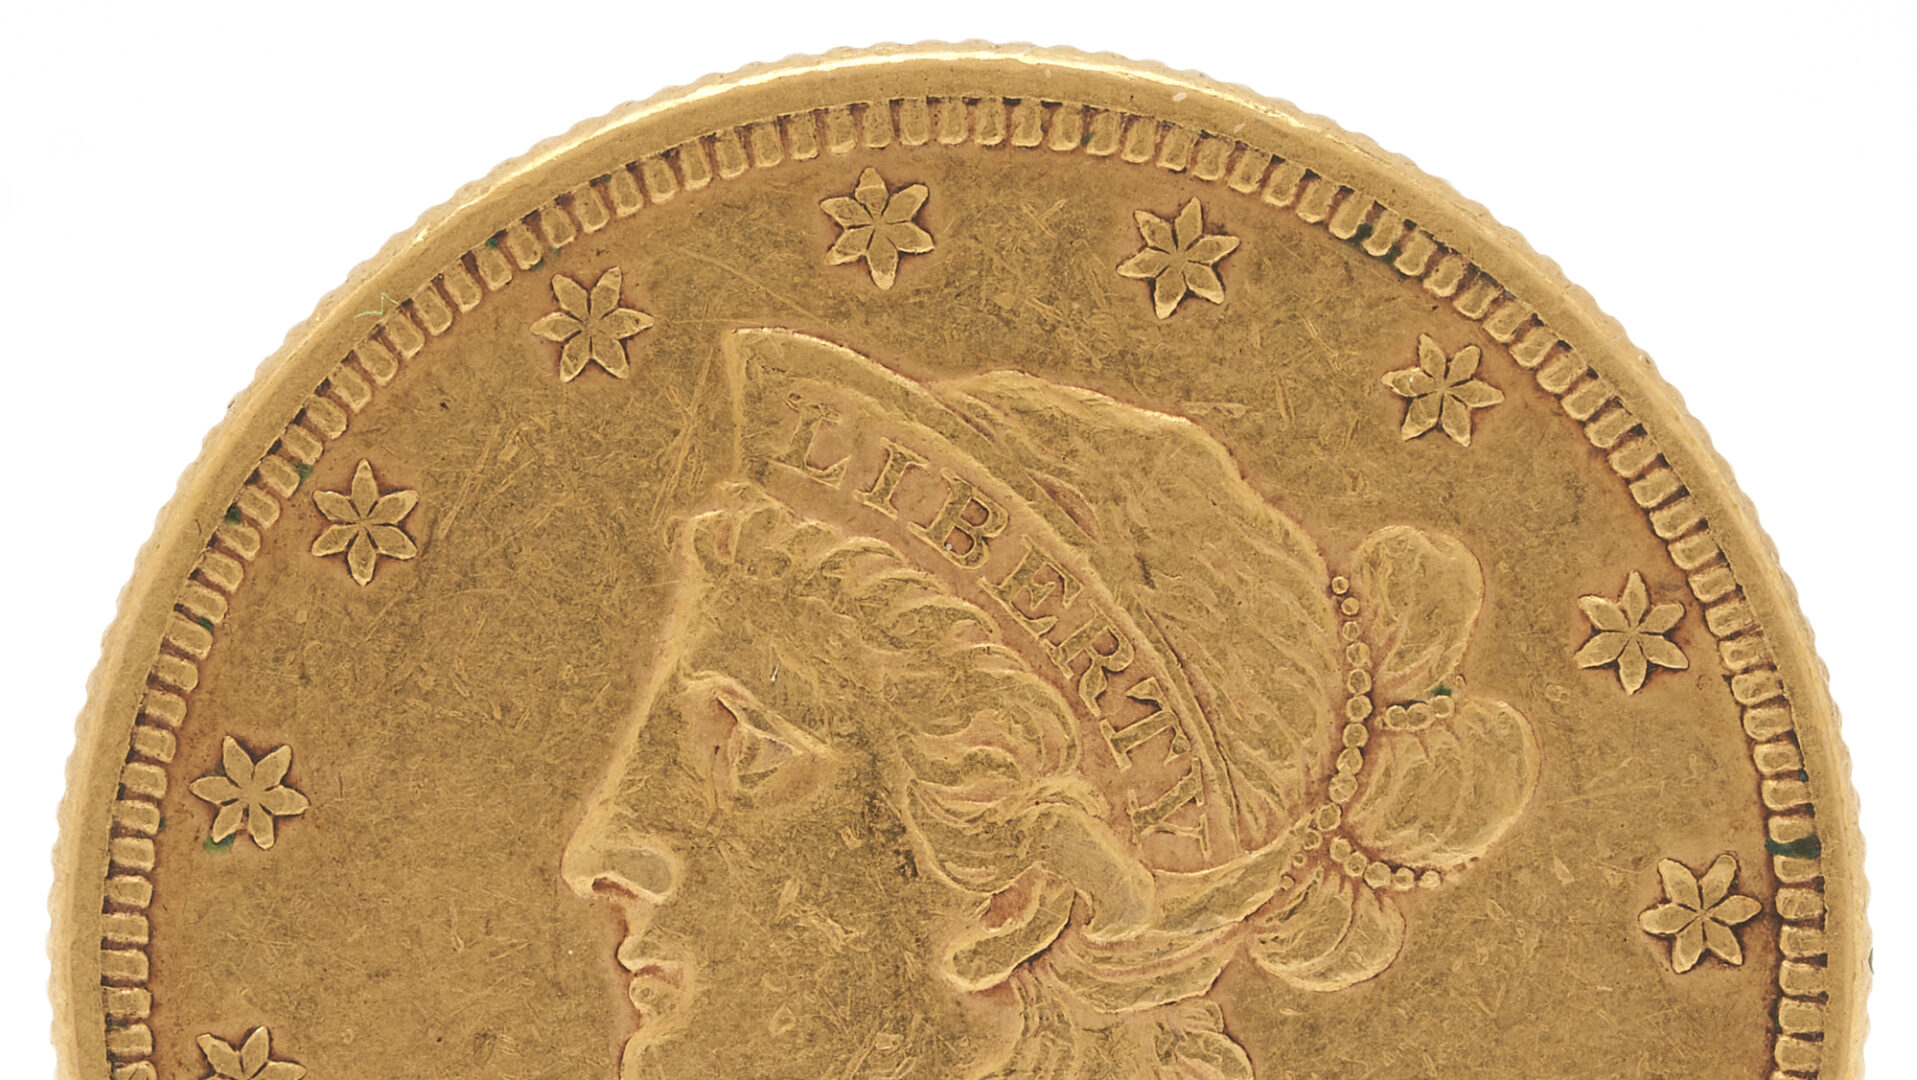 Lot 605: 1882 US $10 Liberty Head Gold Coin